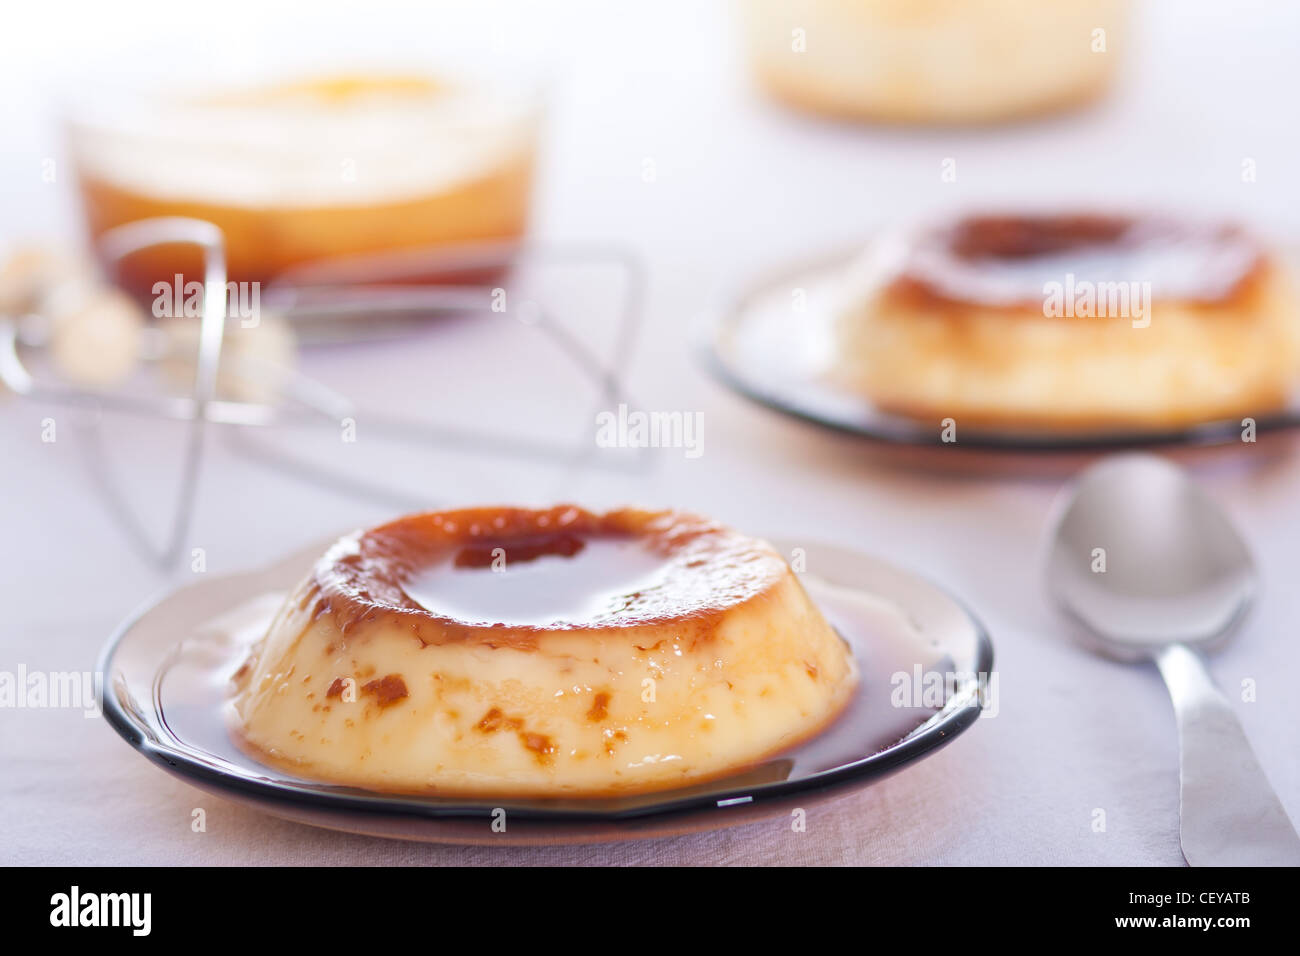 Flan: Sweet custard with a caramel topping. Pudding. Vanilla flavour.  Caramel, known as 'flan' in the US and Spanish. Stock Photo